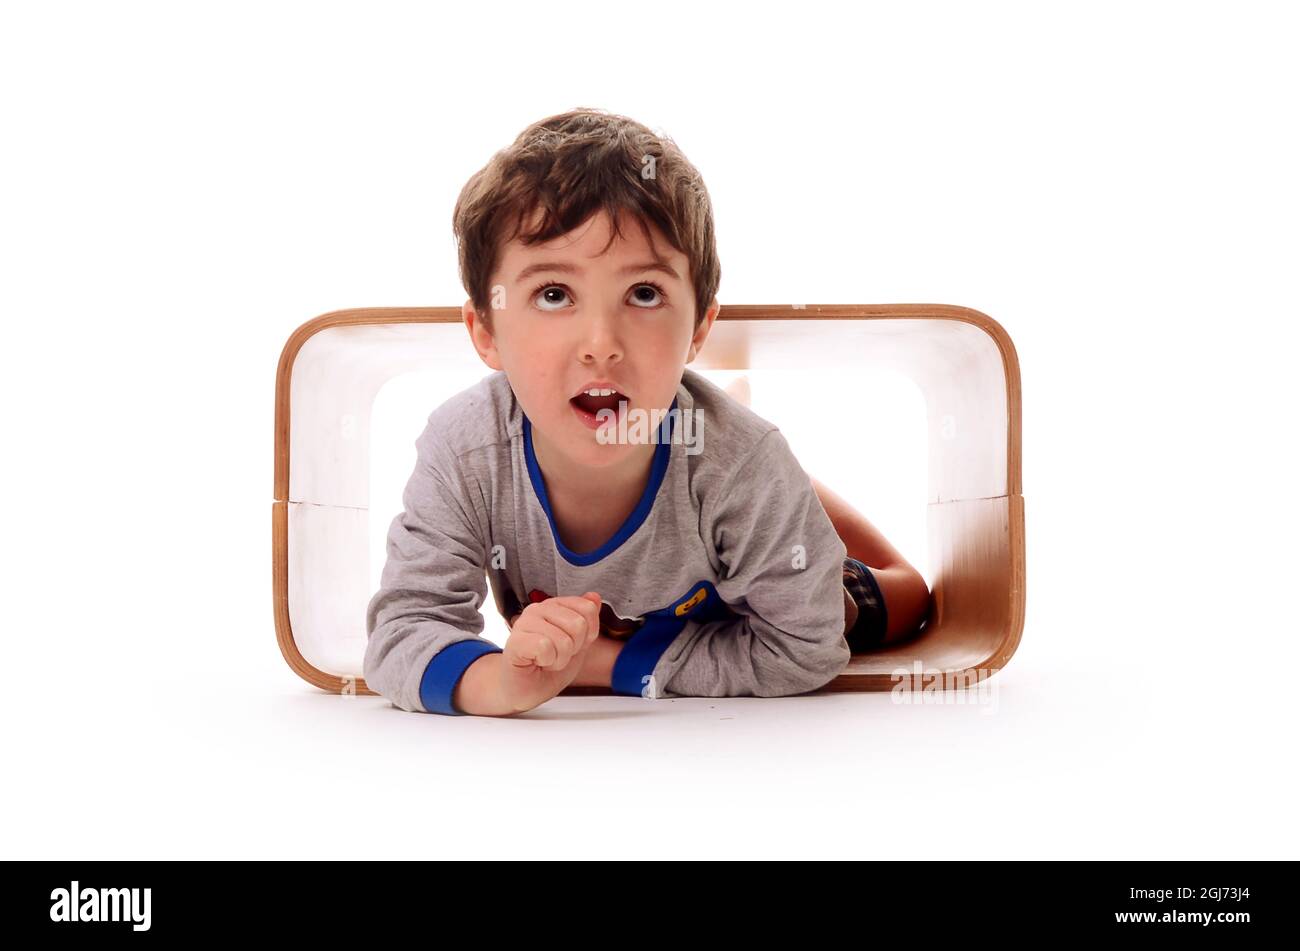 young boy, imaginative play alone due to the pandemic Stock Photo